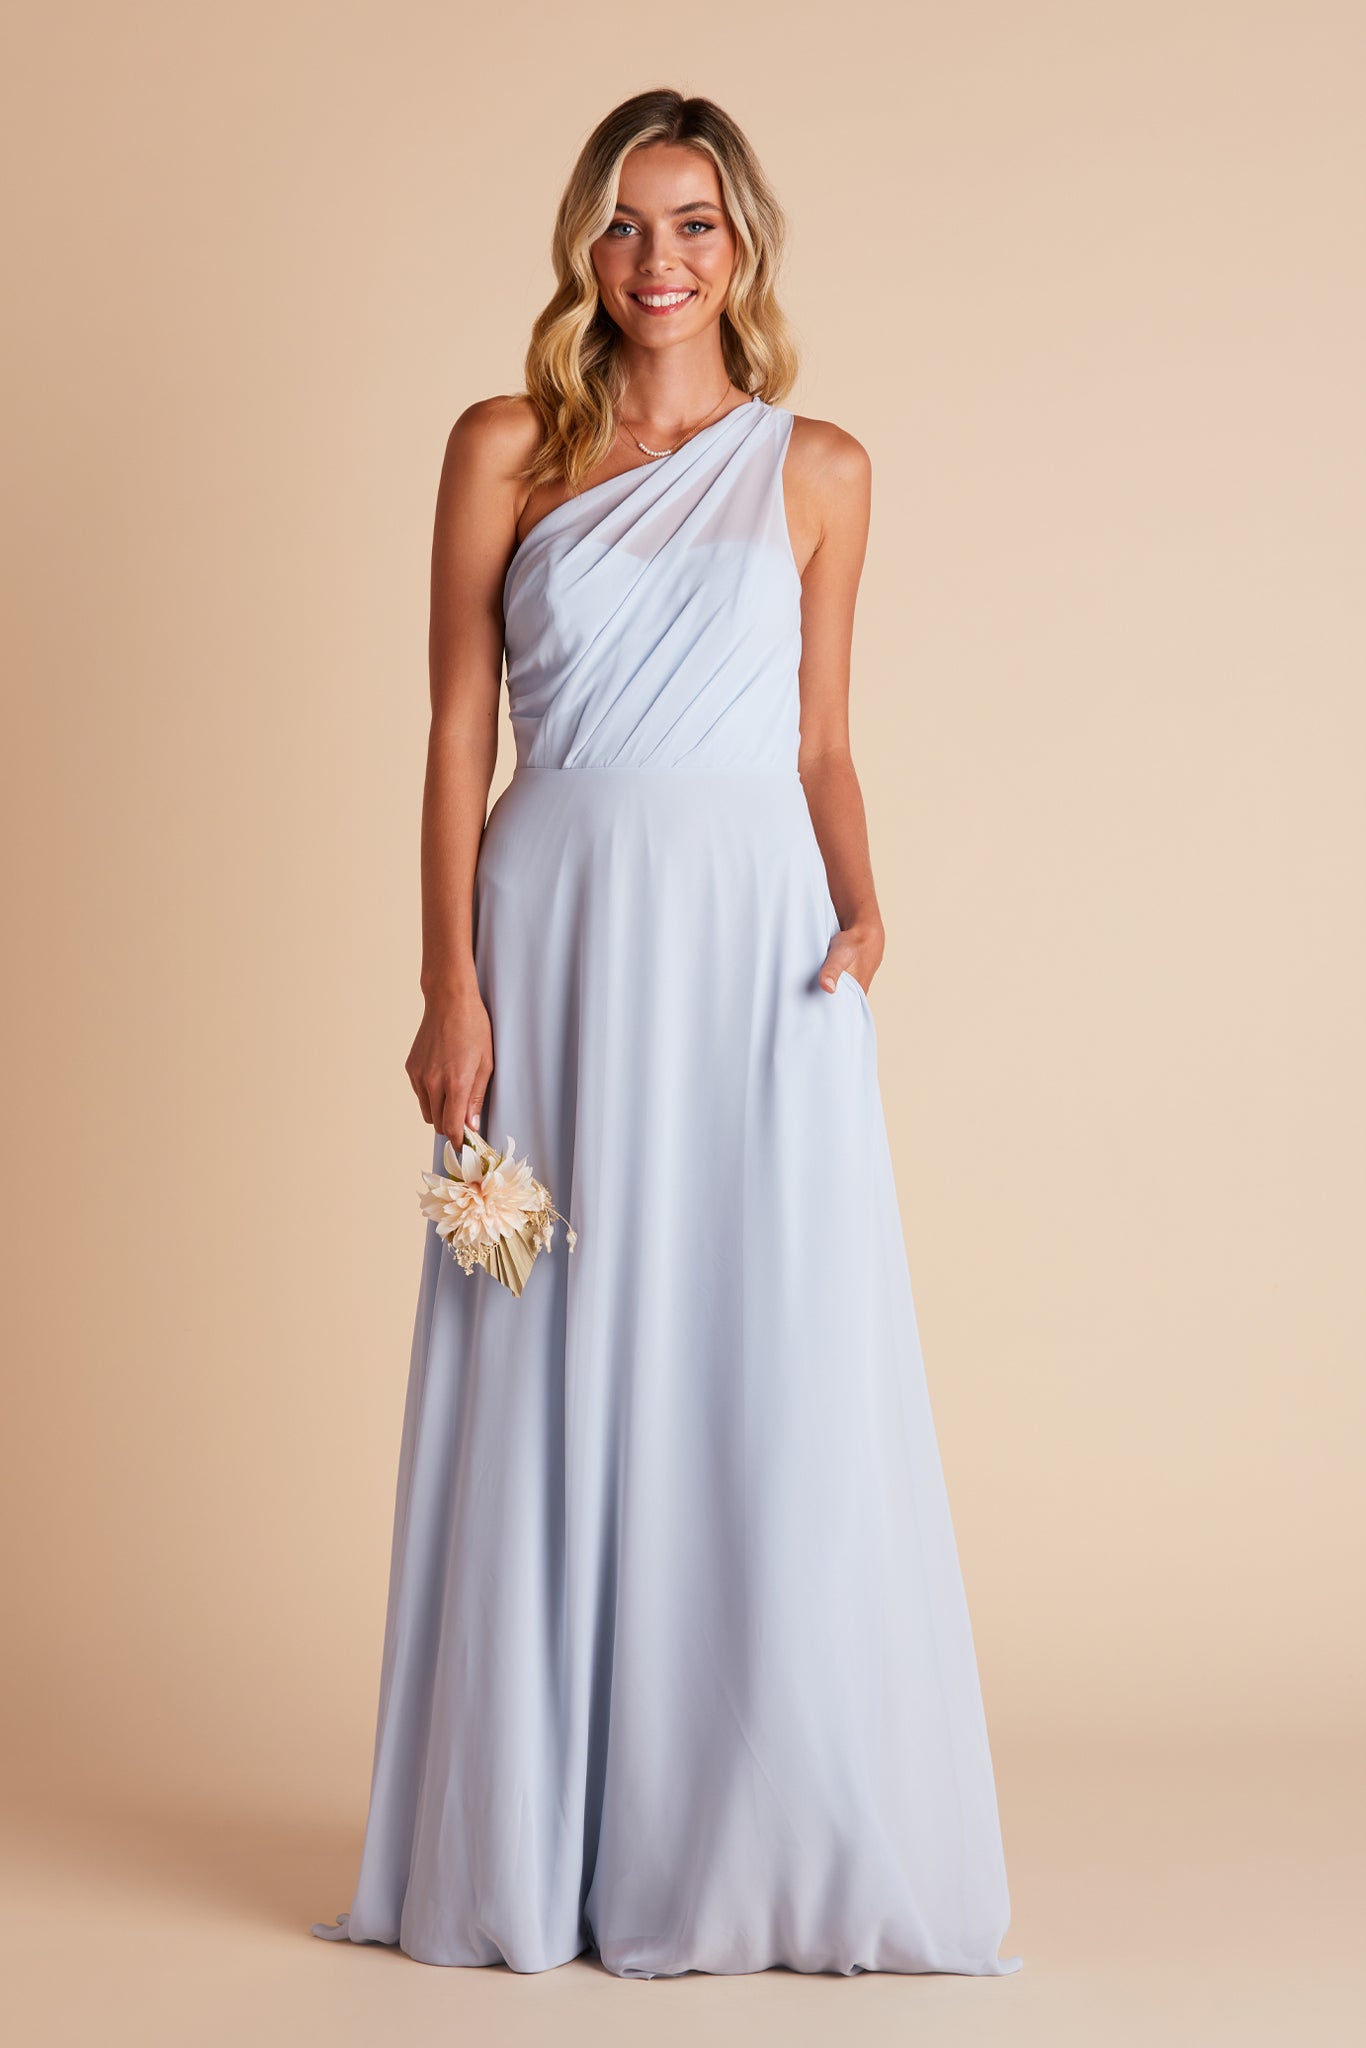 Kira bridesmaids dress in ice blue chiffon by Birdy Grey, front view with hand in pocket